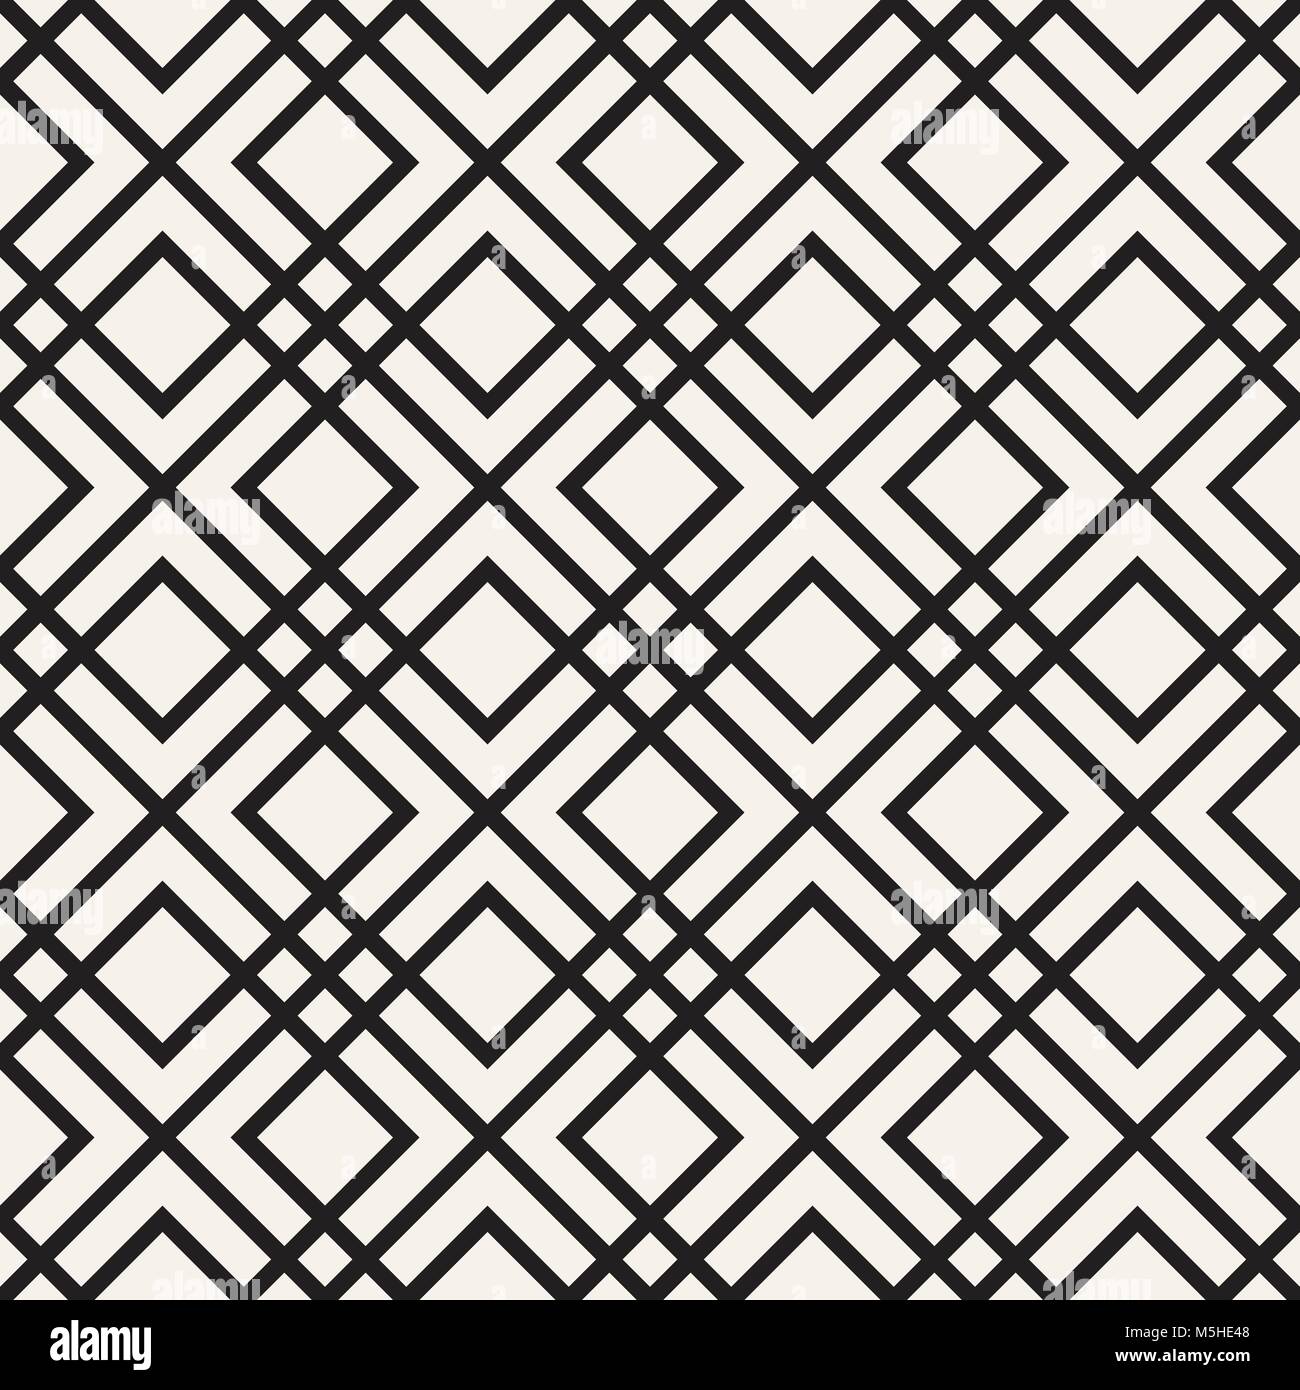 Vector seamless lattice pattern. Modern stylish texture with monochrome trellis. Repeating geometric grid. Simple graphic background.  Stock Vector